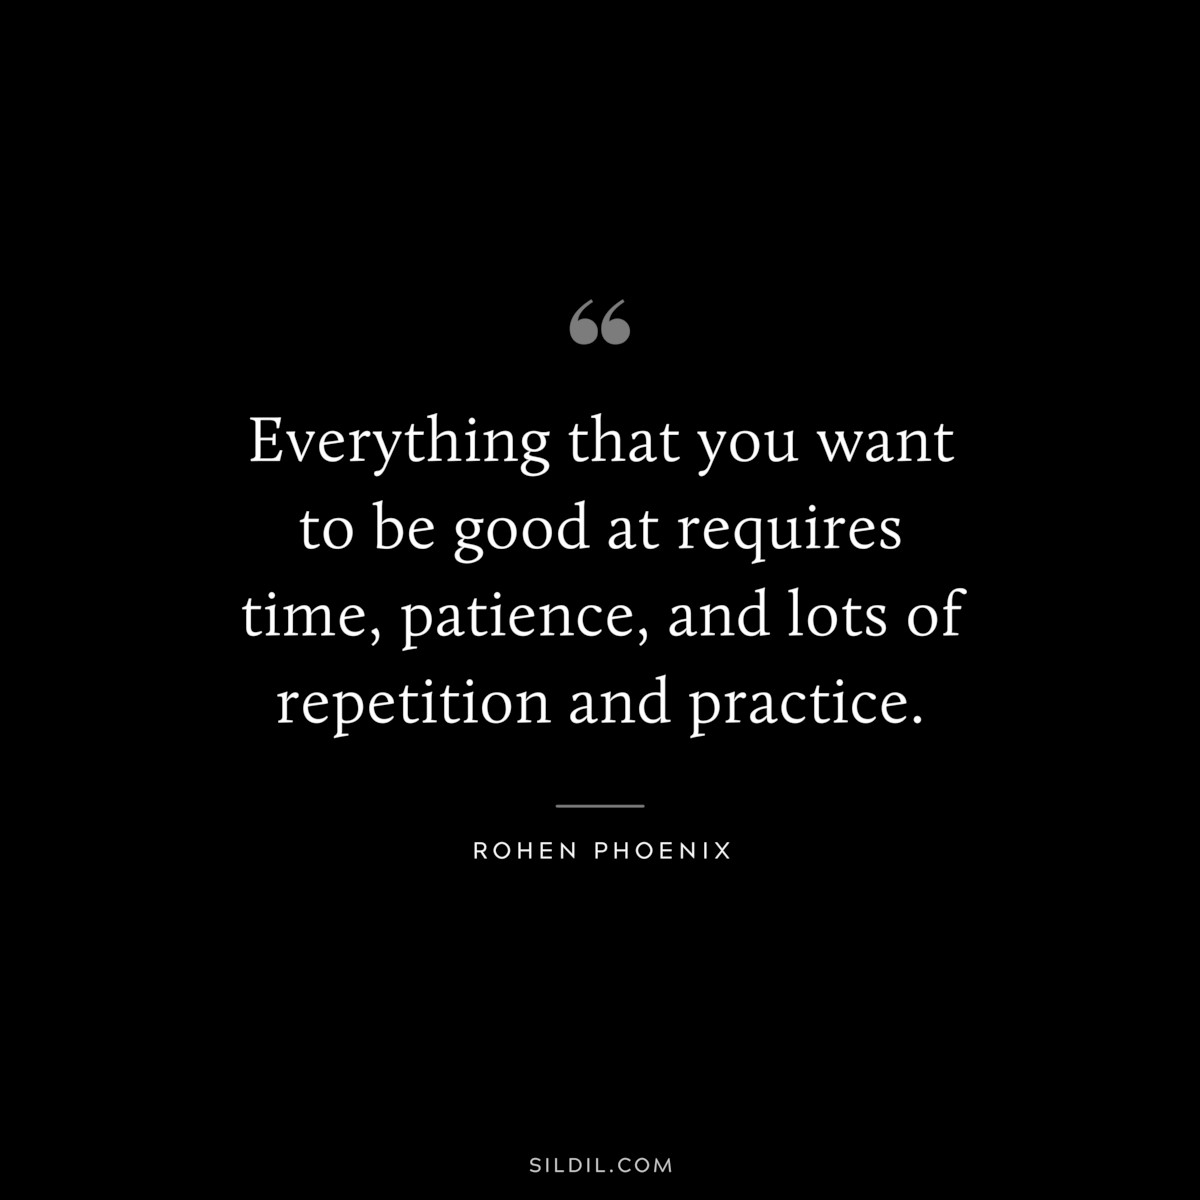 Everything that you want to be good at requires time, patience, and lots of repetition and practice. ― Rohen Phoenix